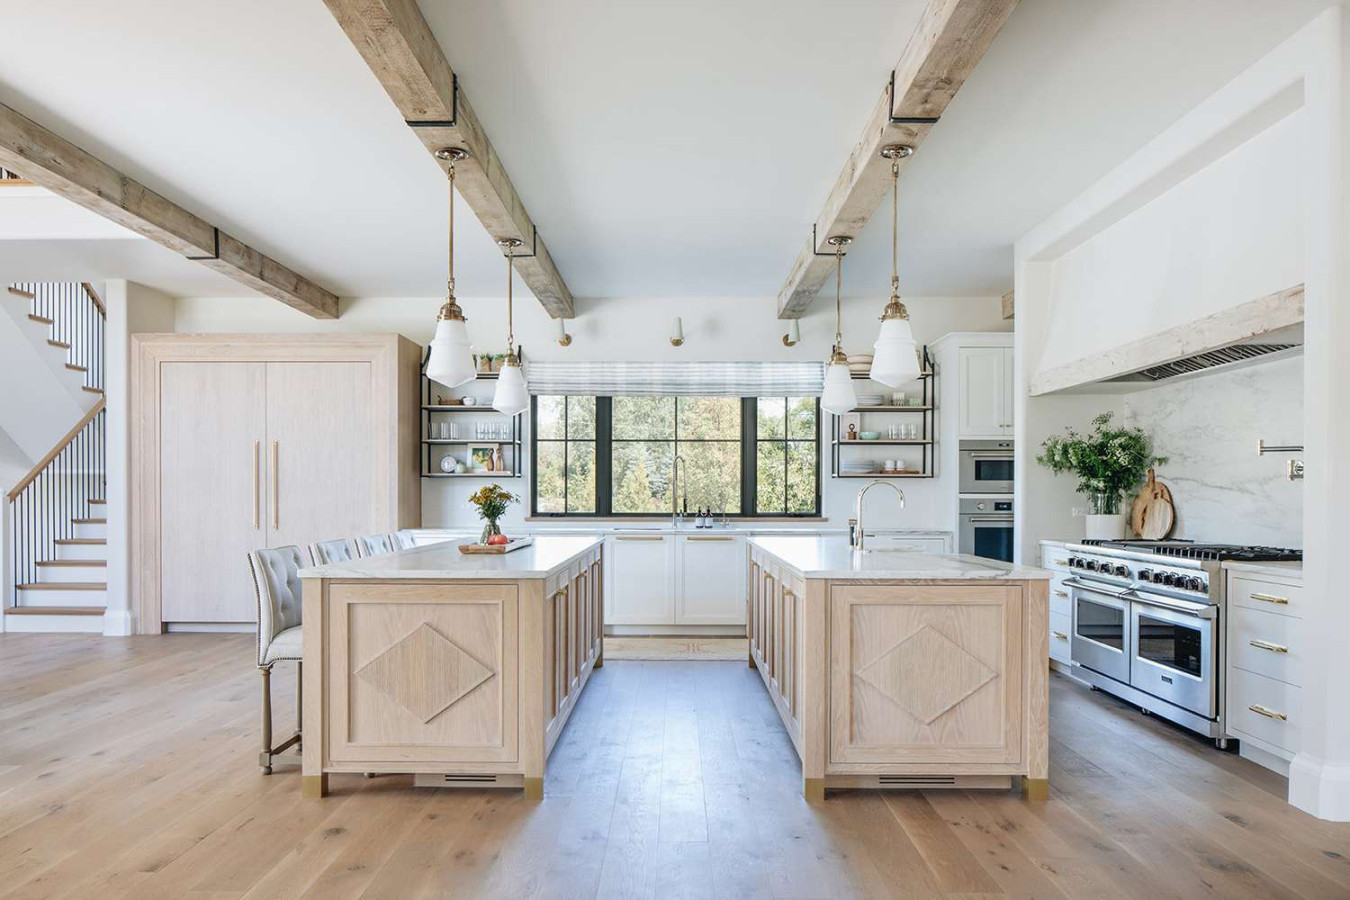 Get Inspired: 2 Kitchen Island Designs To Elevate Your Space